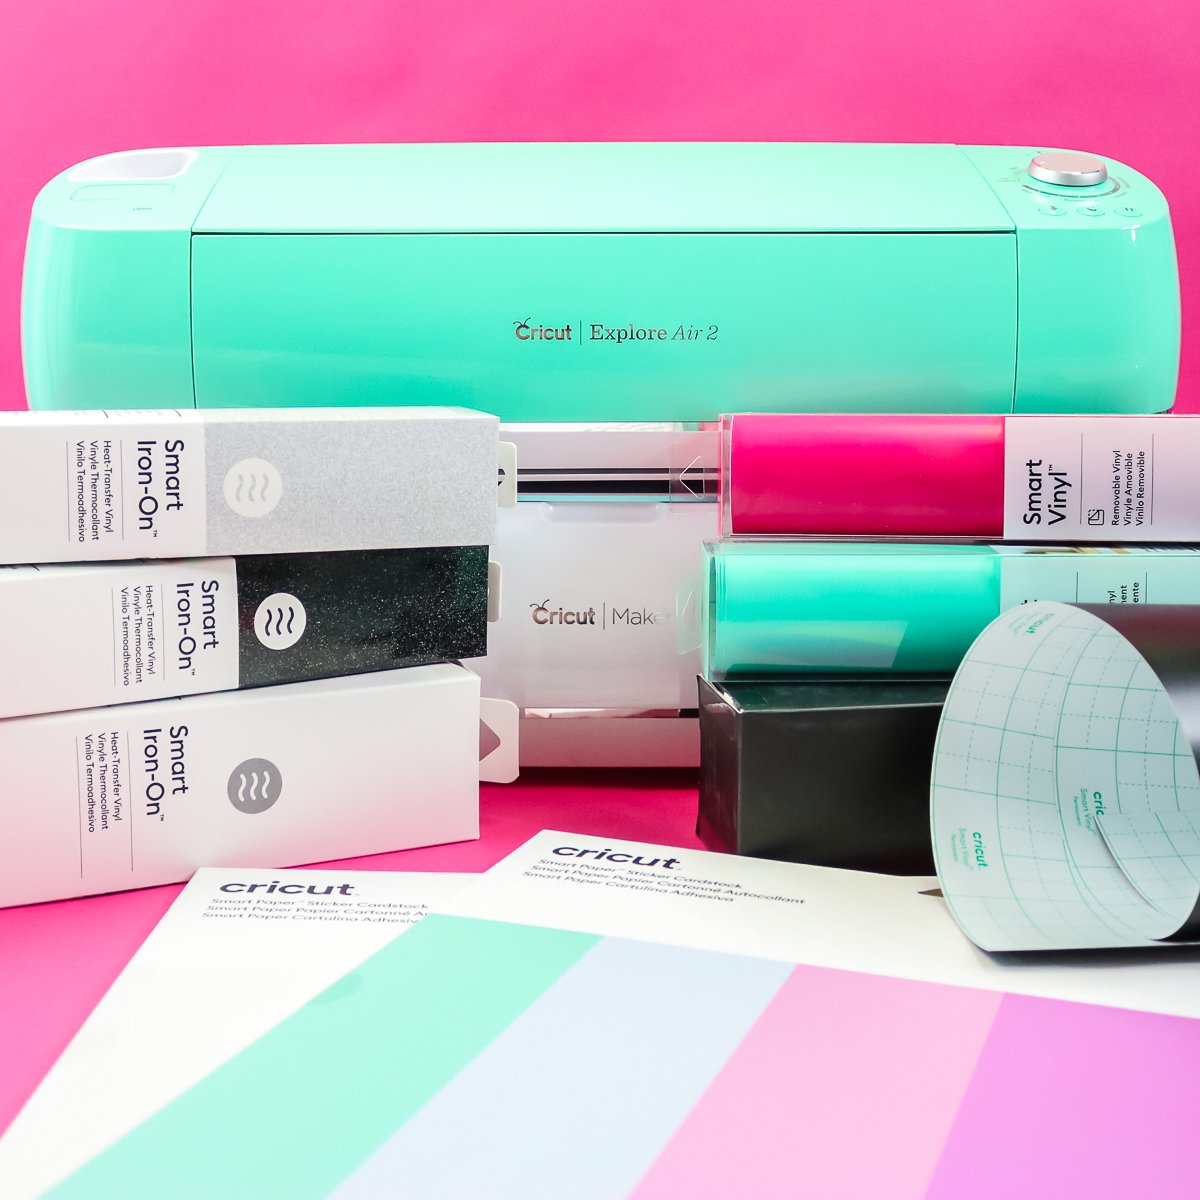 Top 5 Must Have Cricut Accessories for the Explore Air